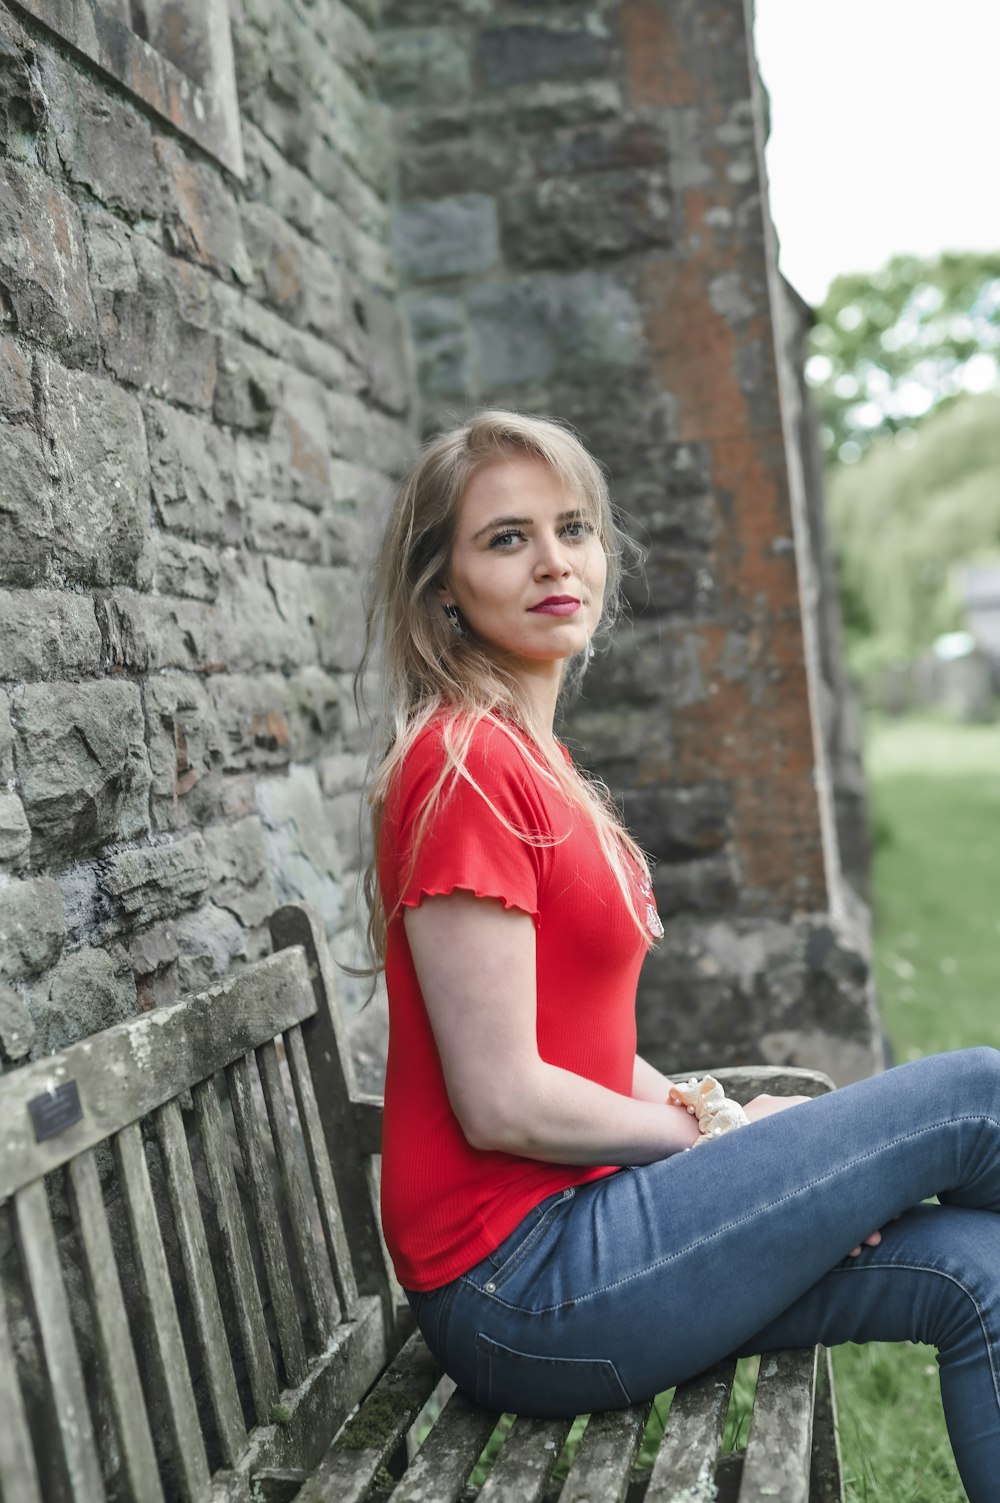 in red shirt and blue denim jeans sitting on brown wooden bench photo – Alveston Image on Unsplash